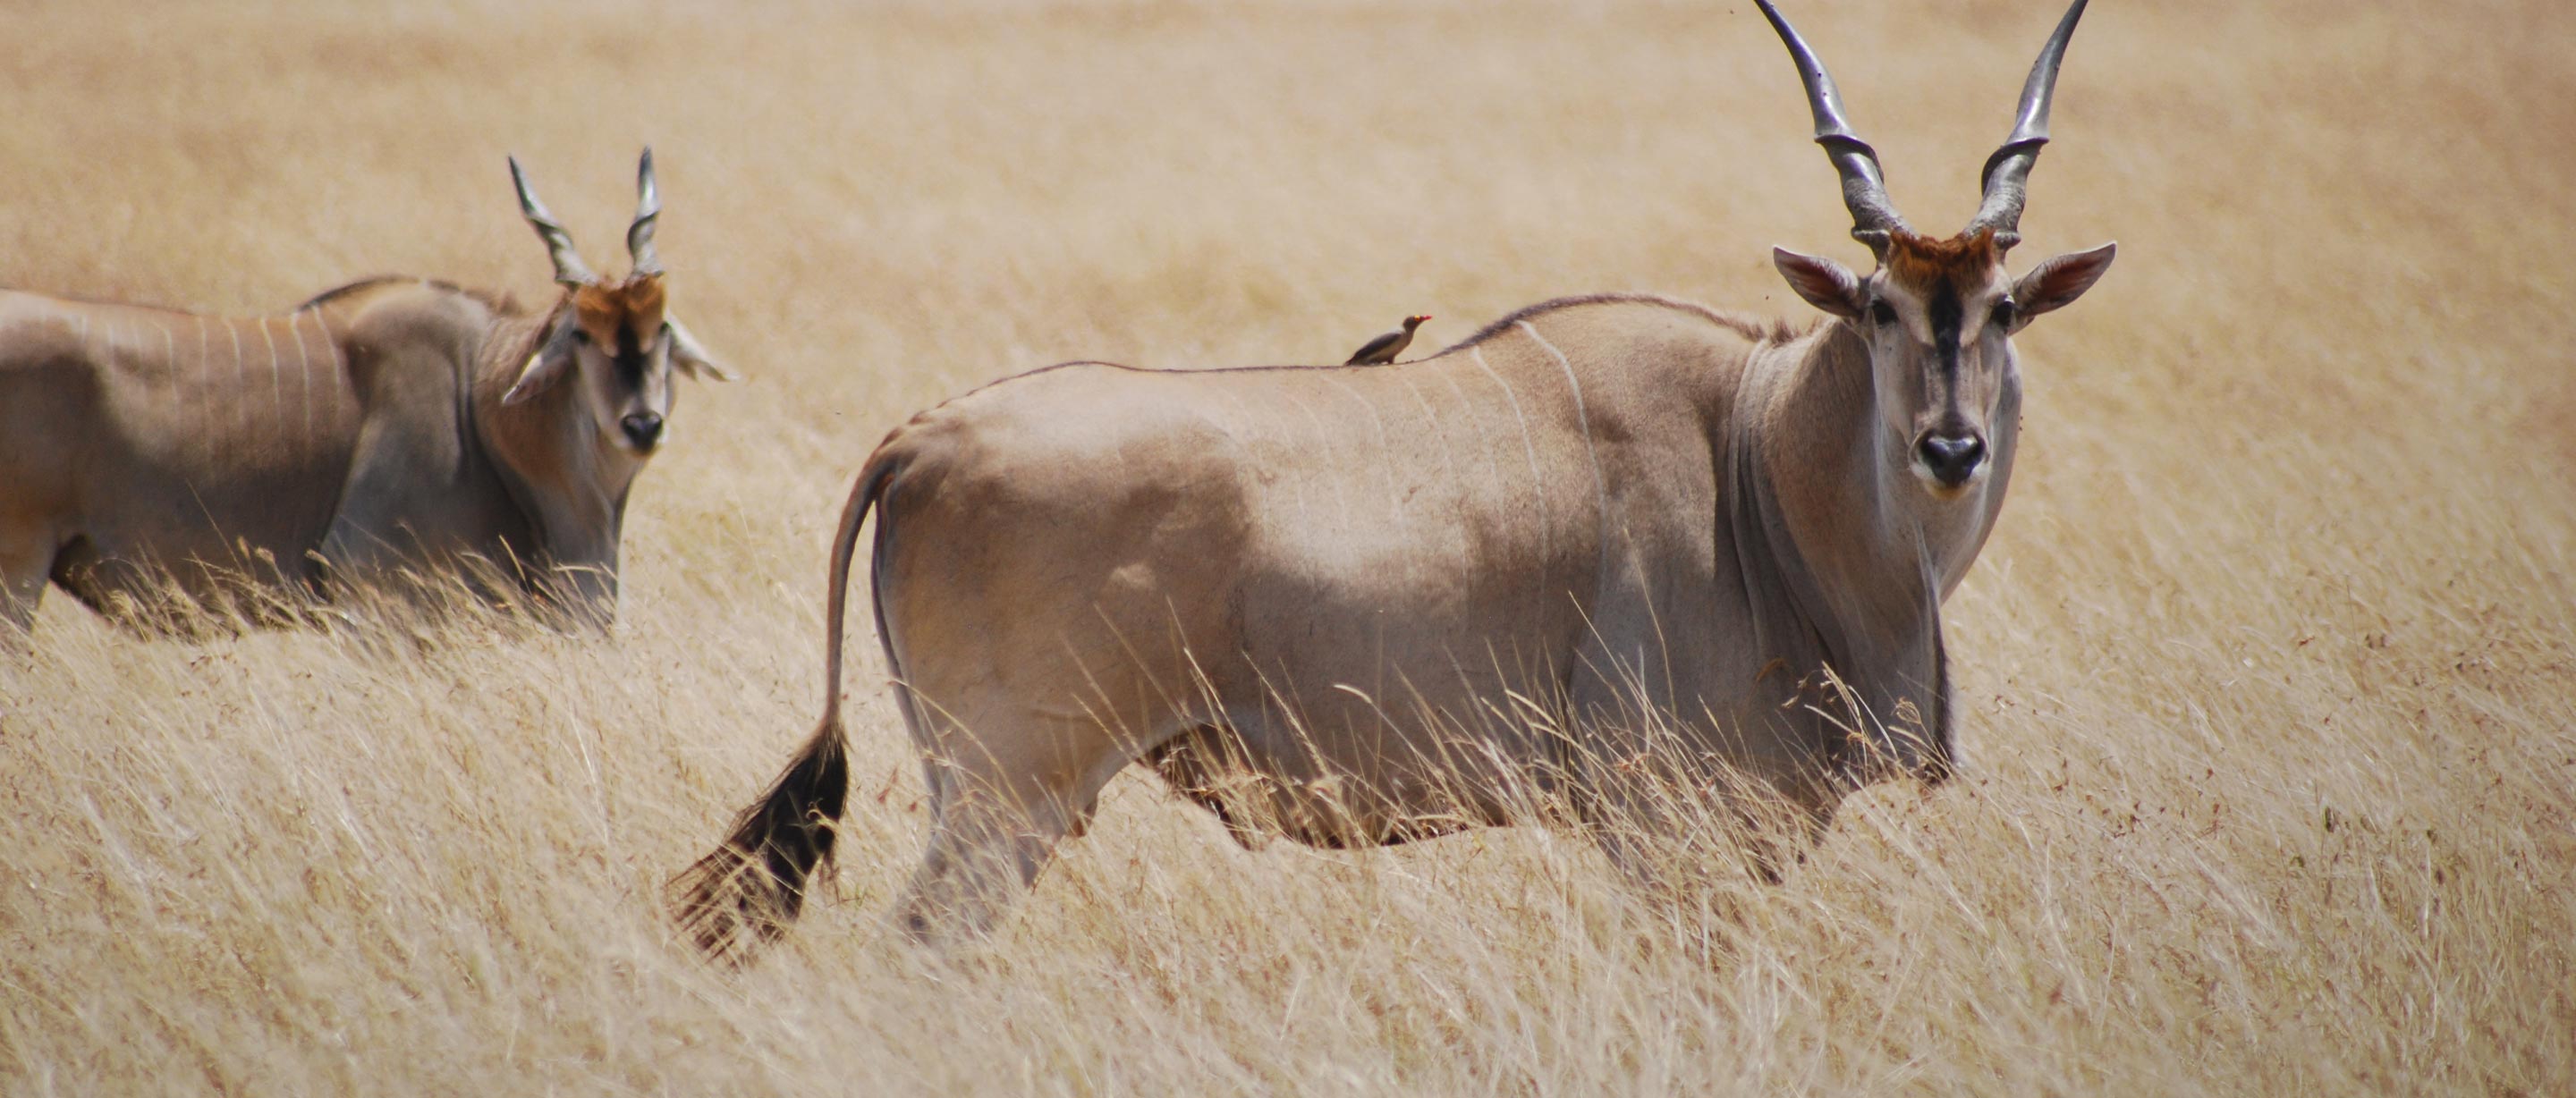 South Africa's wildlife ranches can offer solutions to Africa's growing  conservation challenges